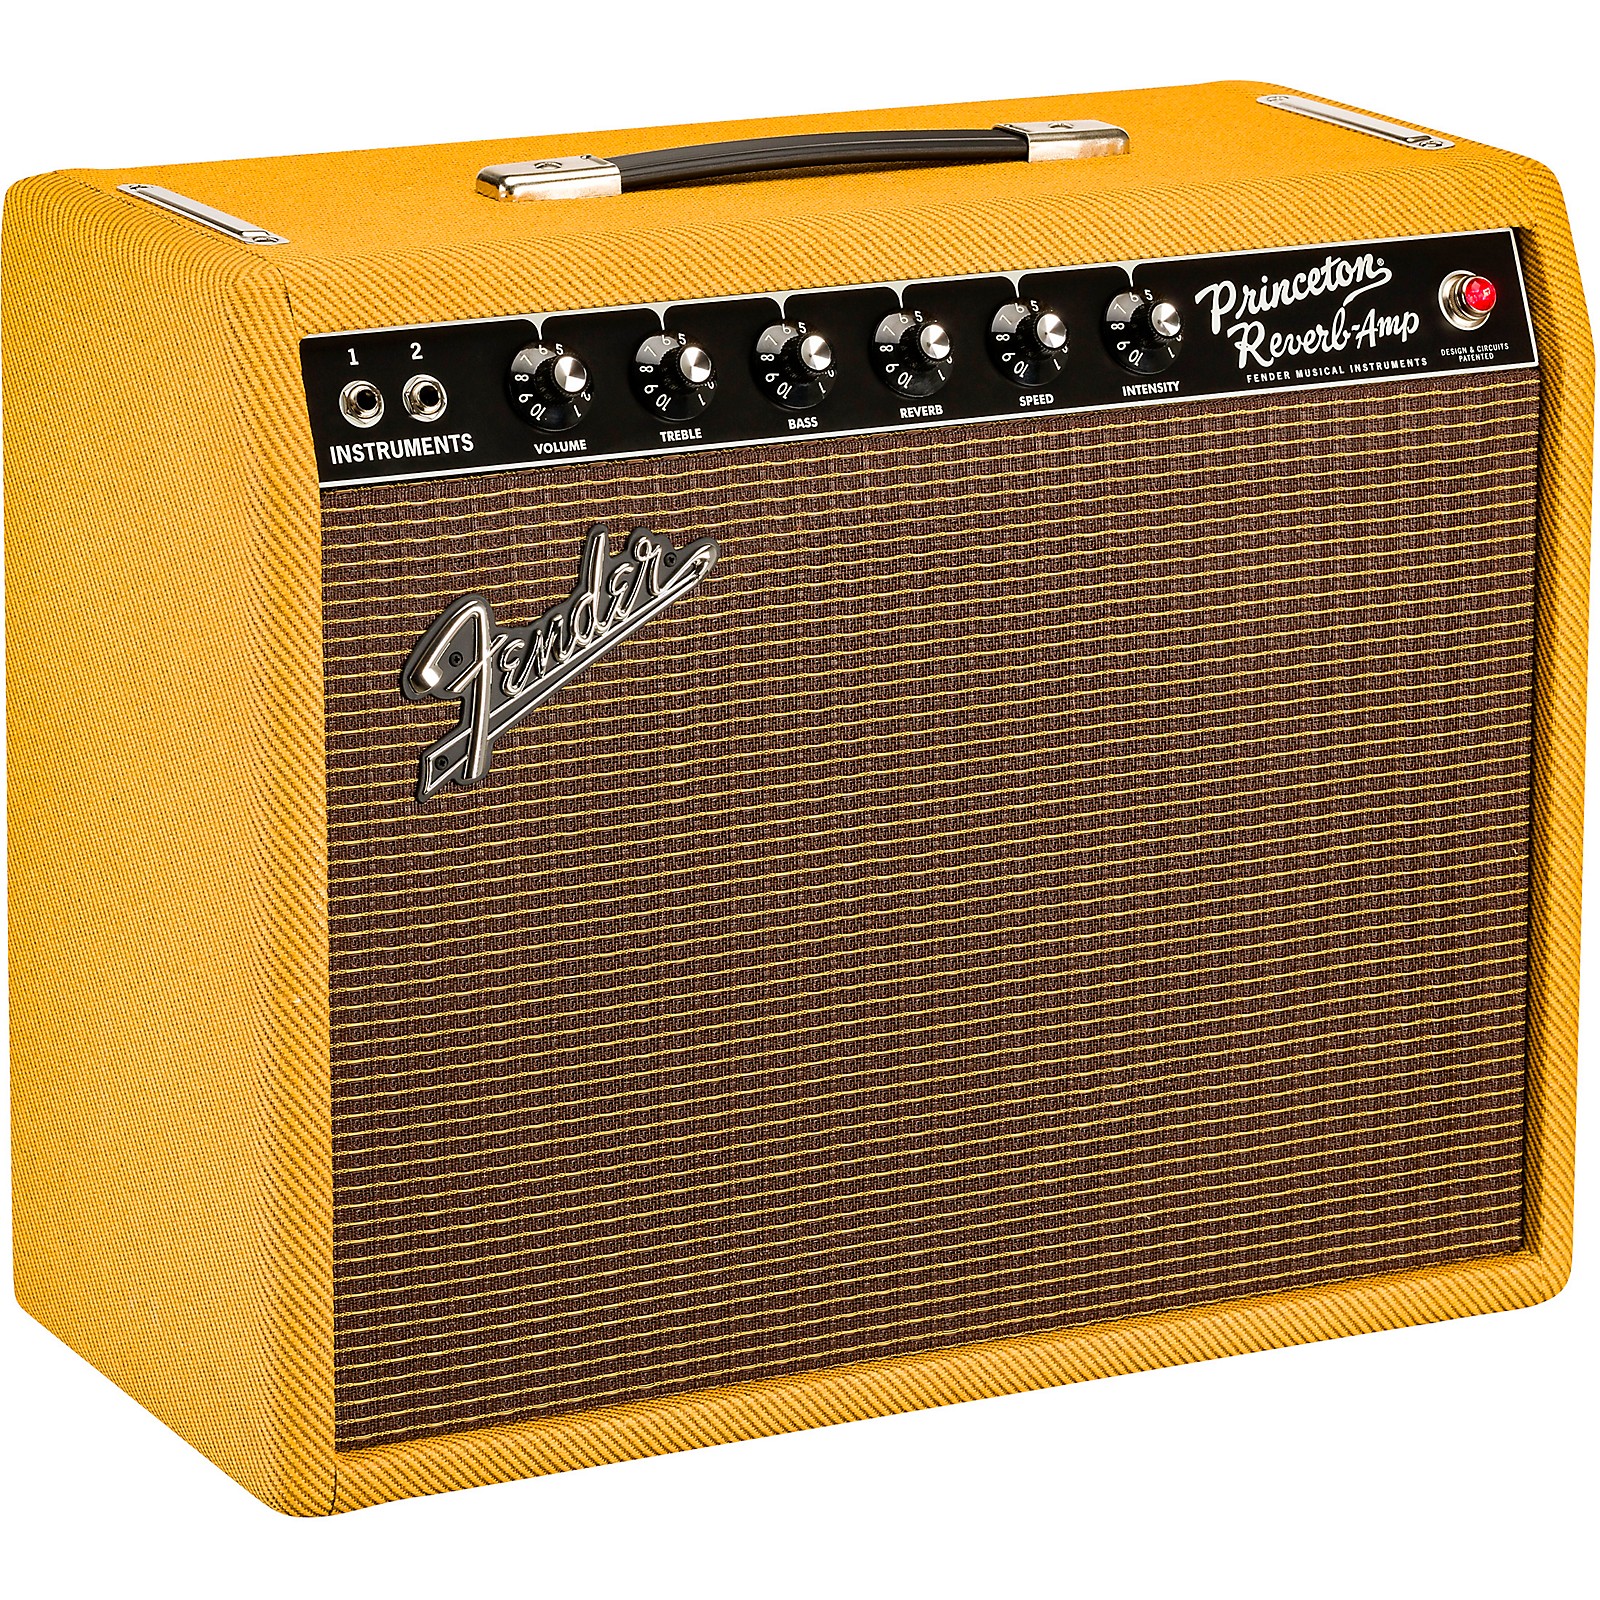 Guitar　Fender　Tube　Center　Celestion　Limited-Edition　'65　1x12　12W　Reverb　Princeton　G12-65　Tweed　Combo　Amp　Guitar